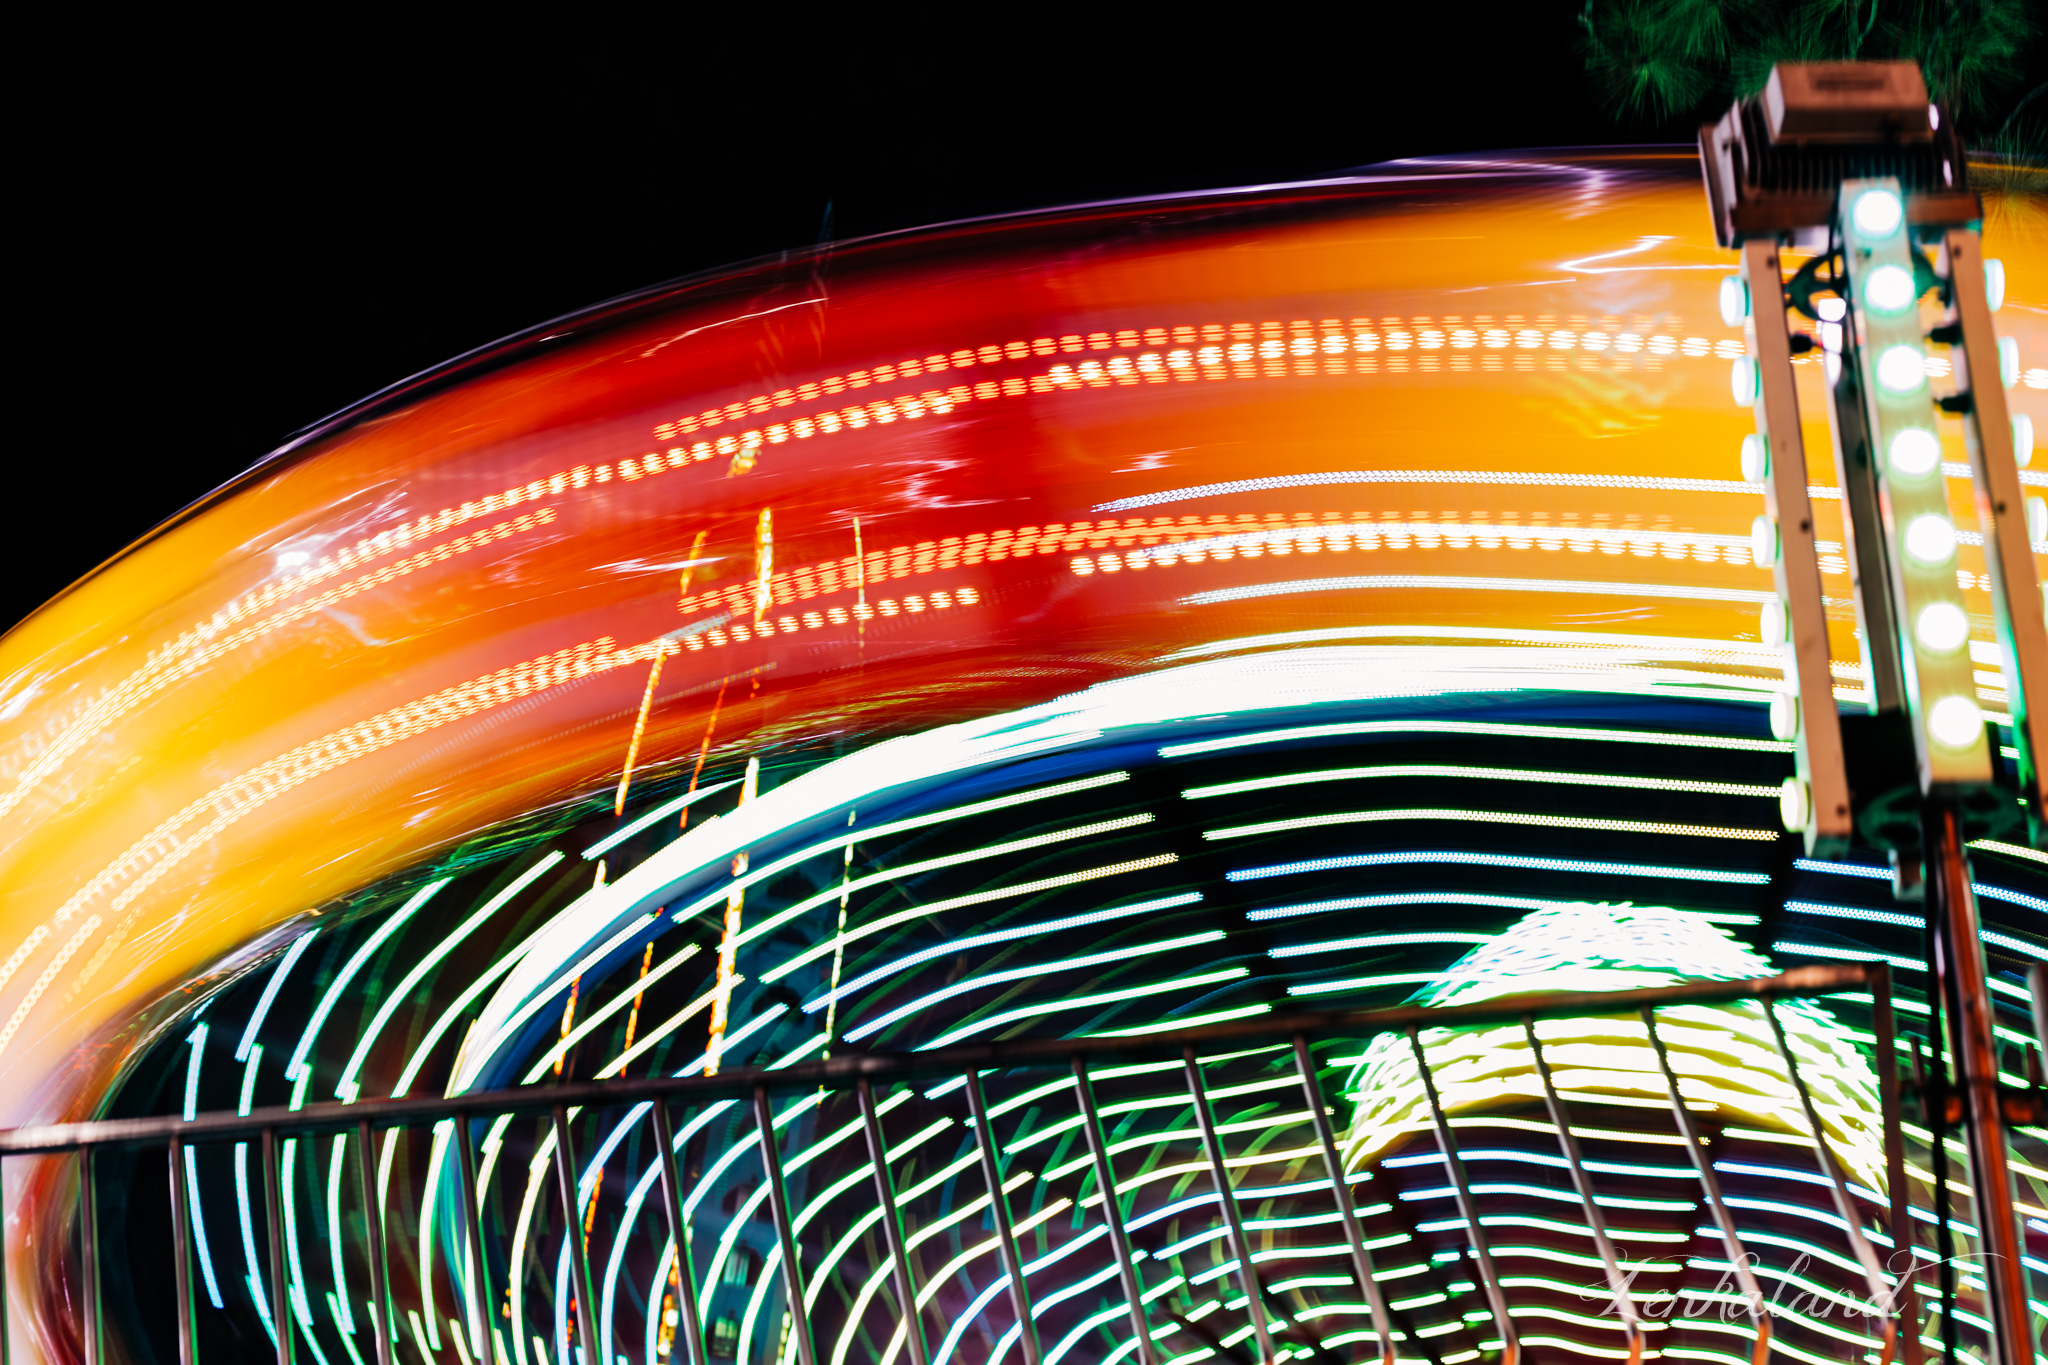 Country Fair Midway at the Nevada County Fair with Lenkaland Photography